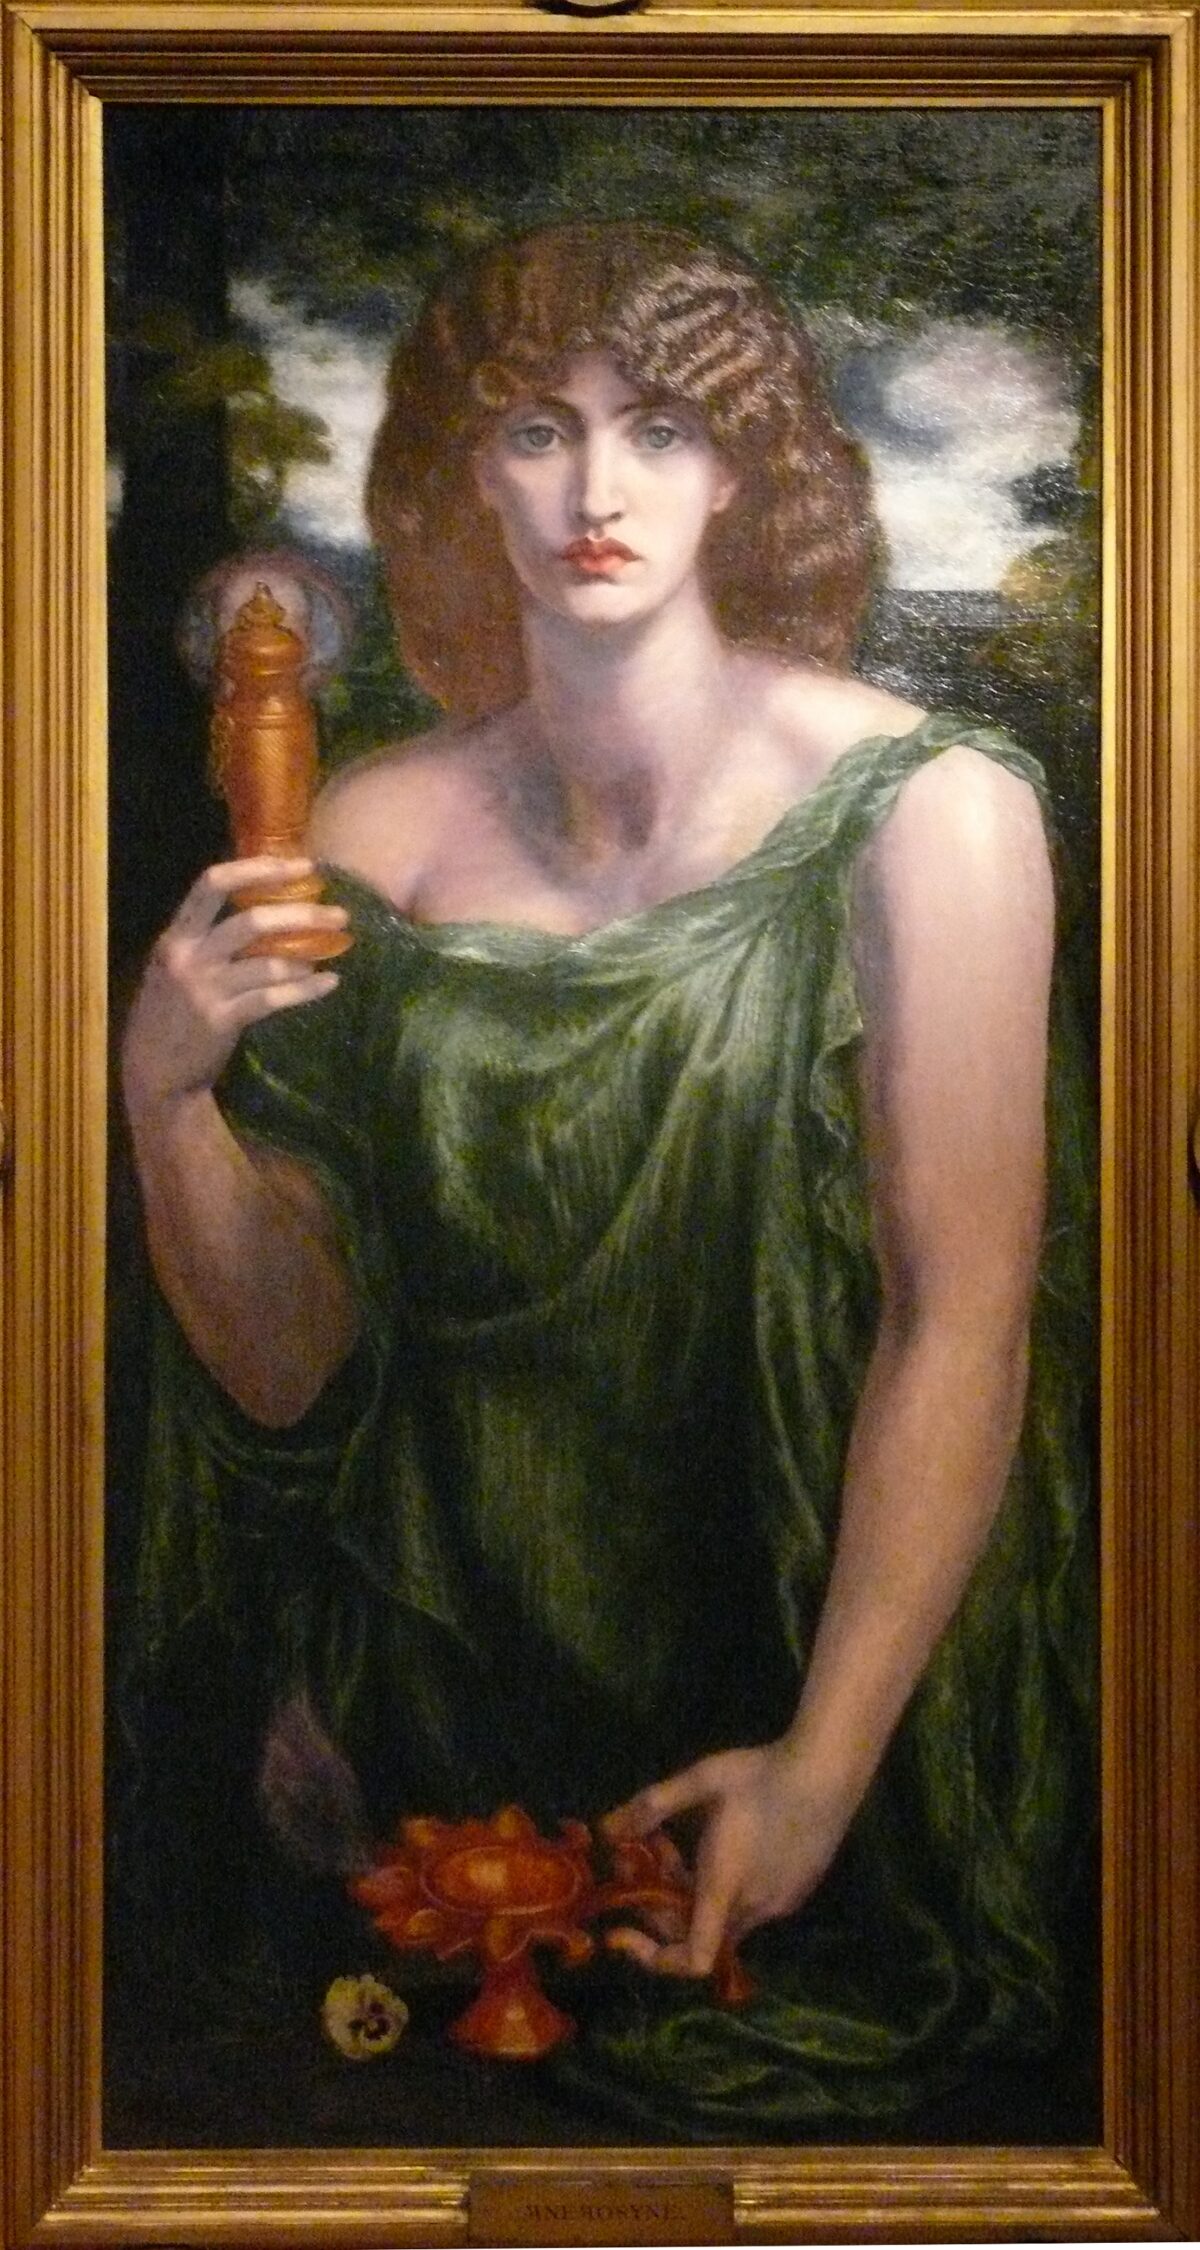 Detail of “Mnemosyne” (aka “Lamp of Memory”), 1881, by Dante Gabriel
Rossetti. Oil on canvas; 49 3/4 inches by 24 inches. Samuel and Mary R. Bancroft Memorial, 1935, at the Delaware Art Museum. (CC BY-SA 3.0)